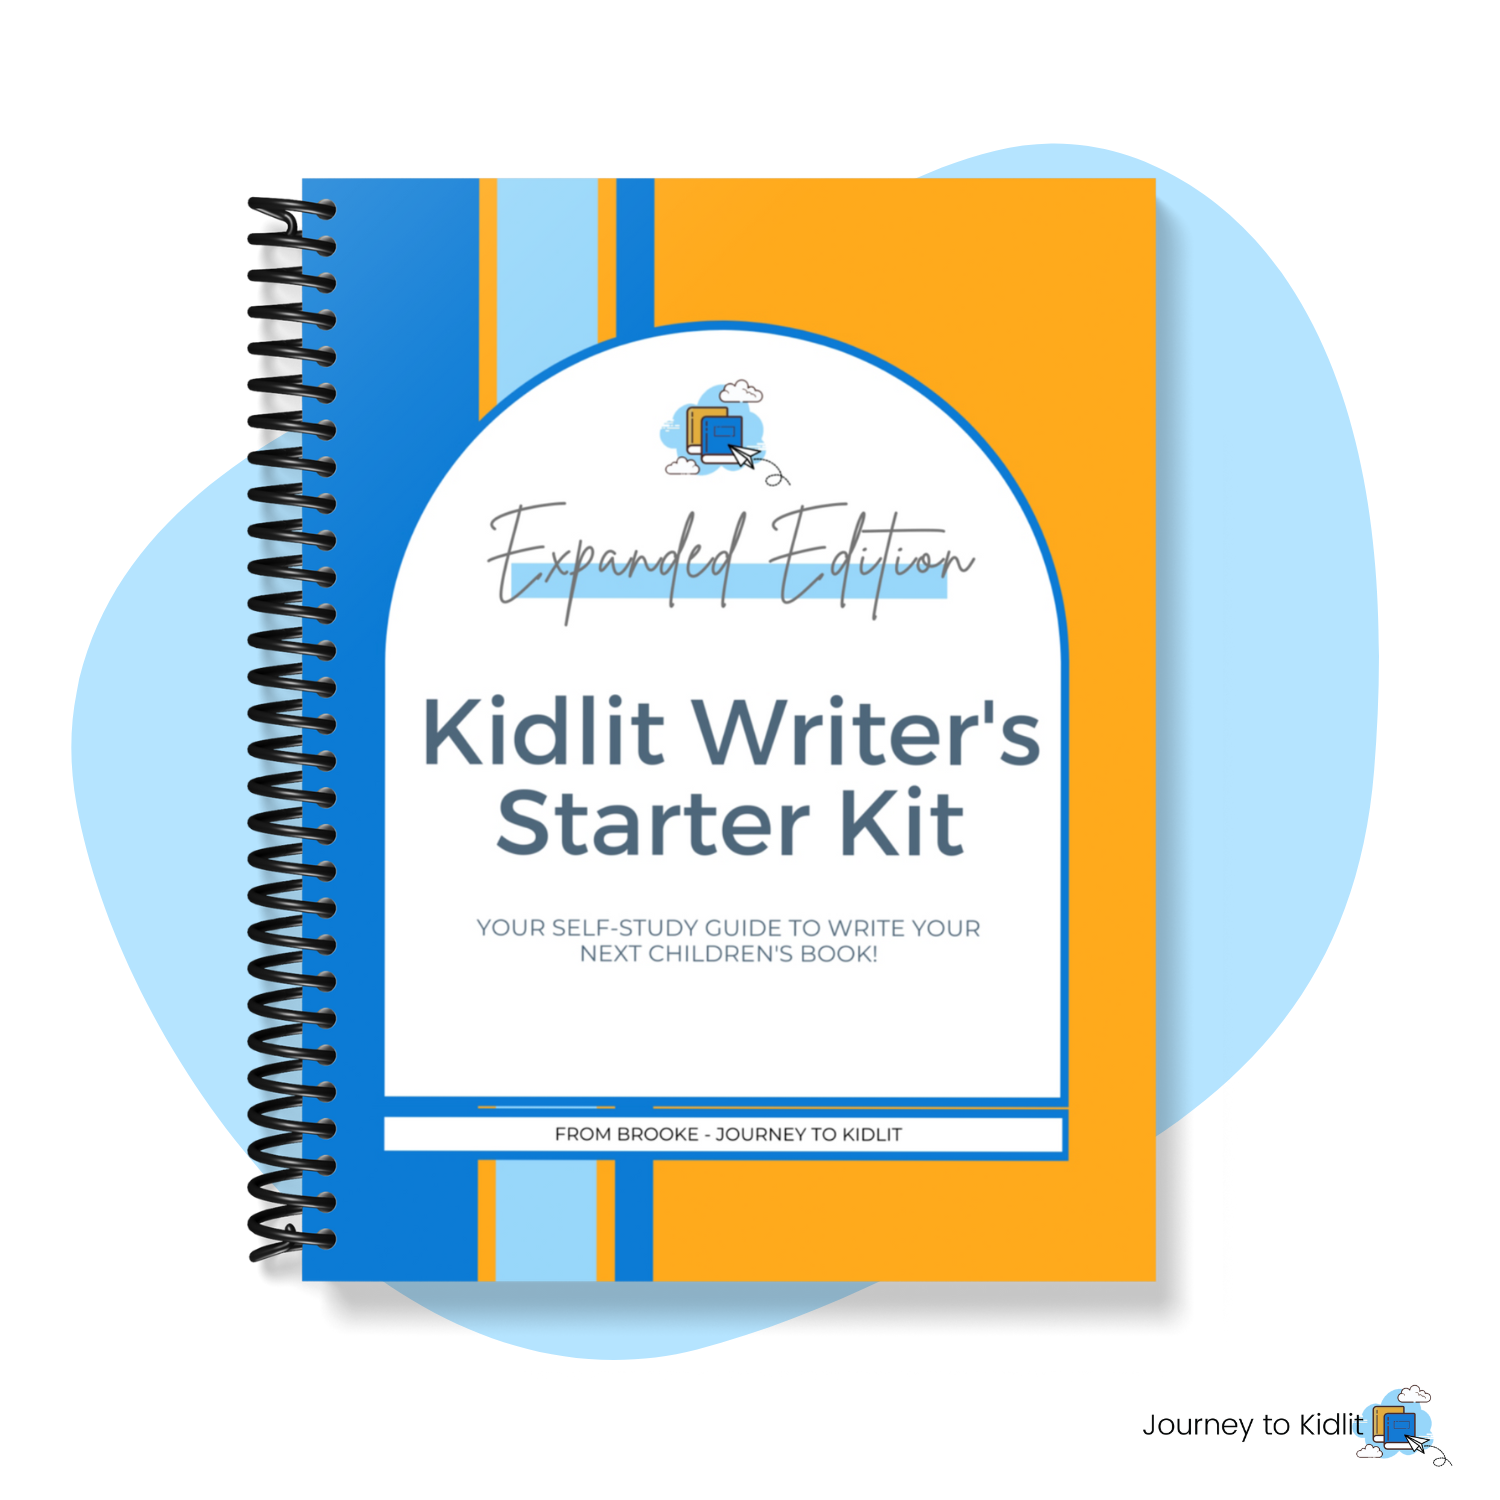 Learn how to write a children's book with the Kidlit Writer's Starter Kit!